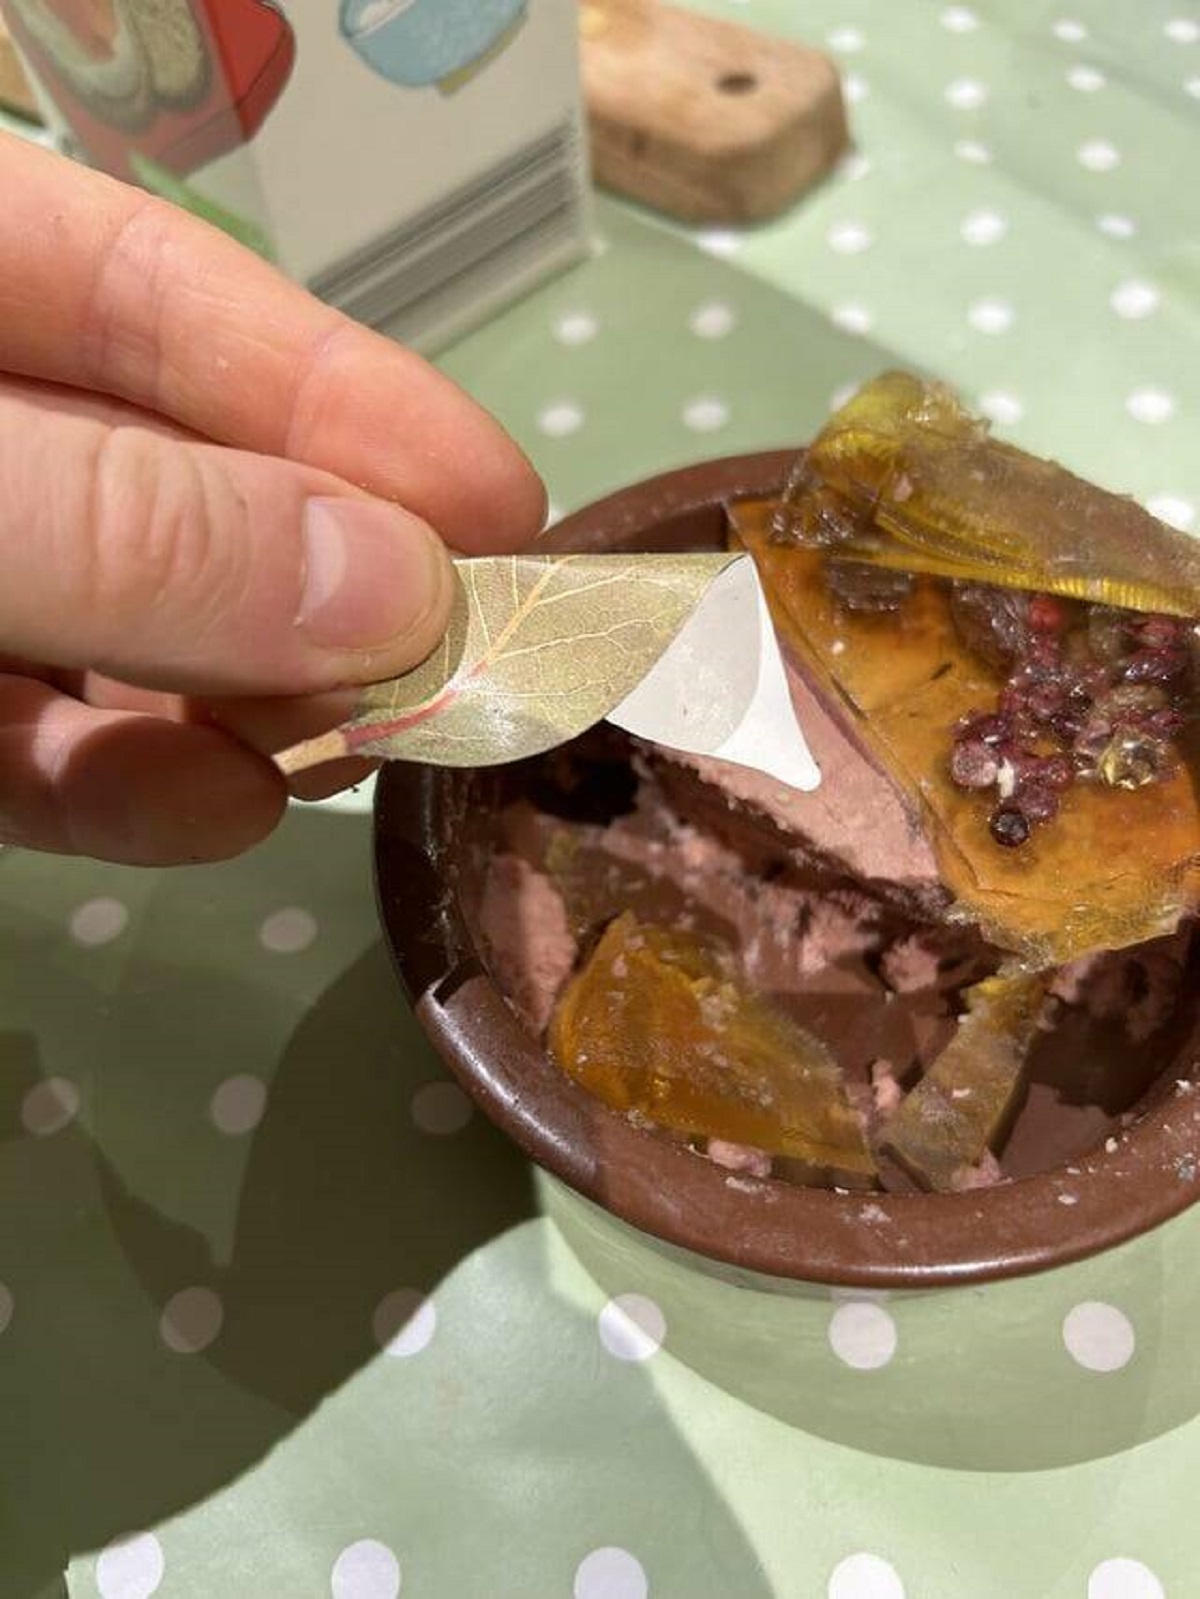 "The bay leaf inside my pâté was actually plastic with a leaf pattern printed on it"